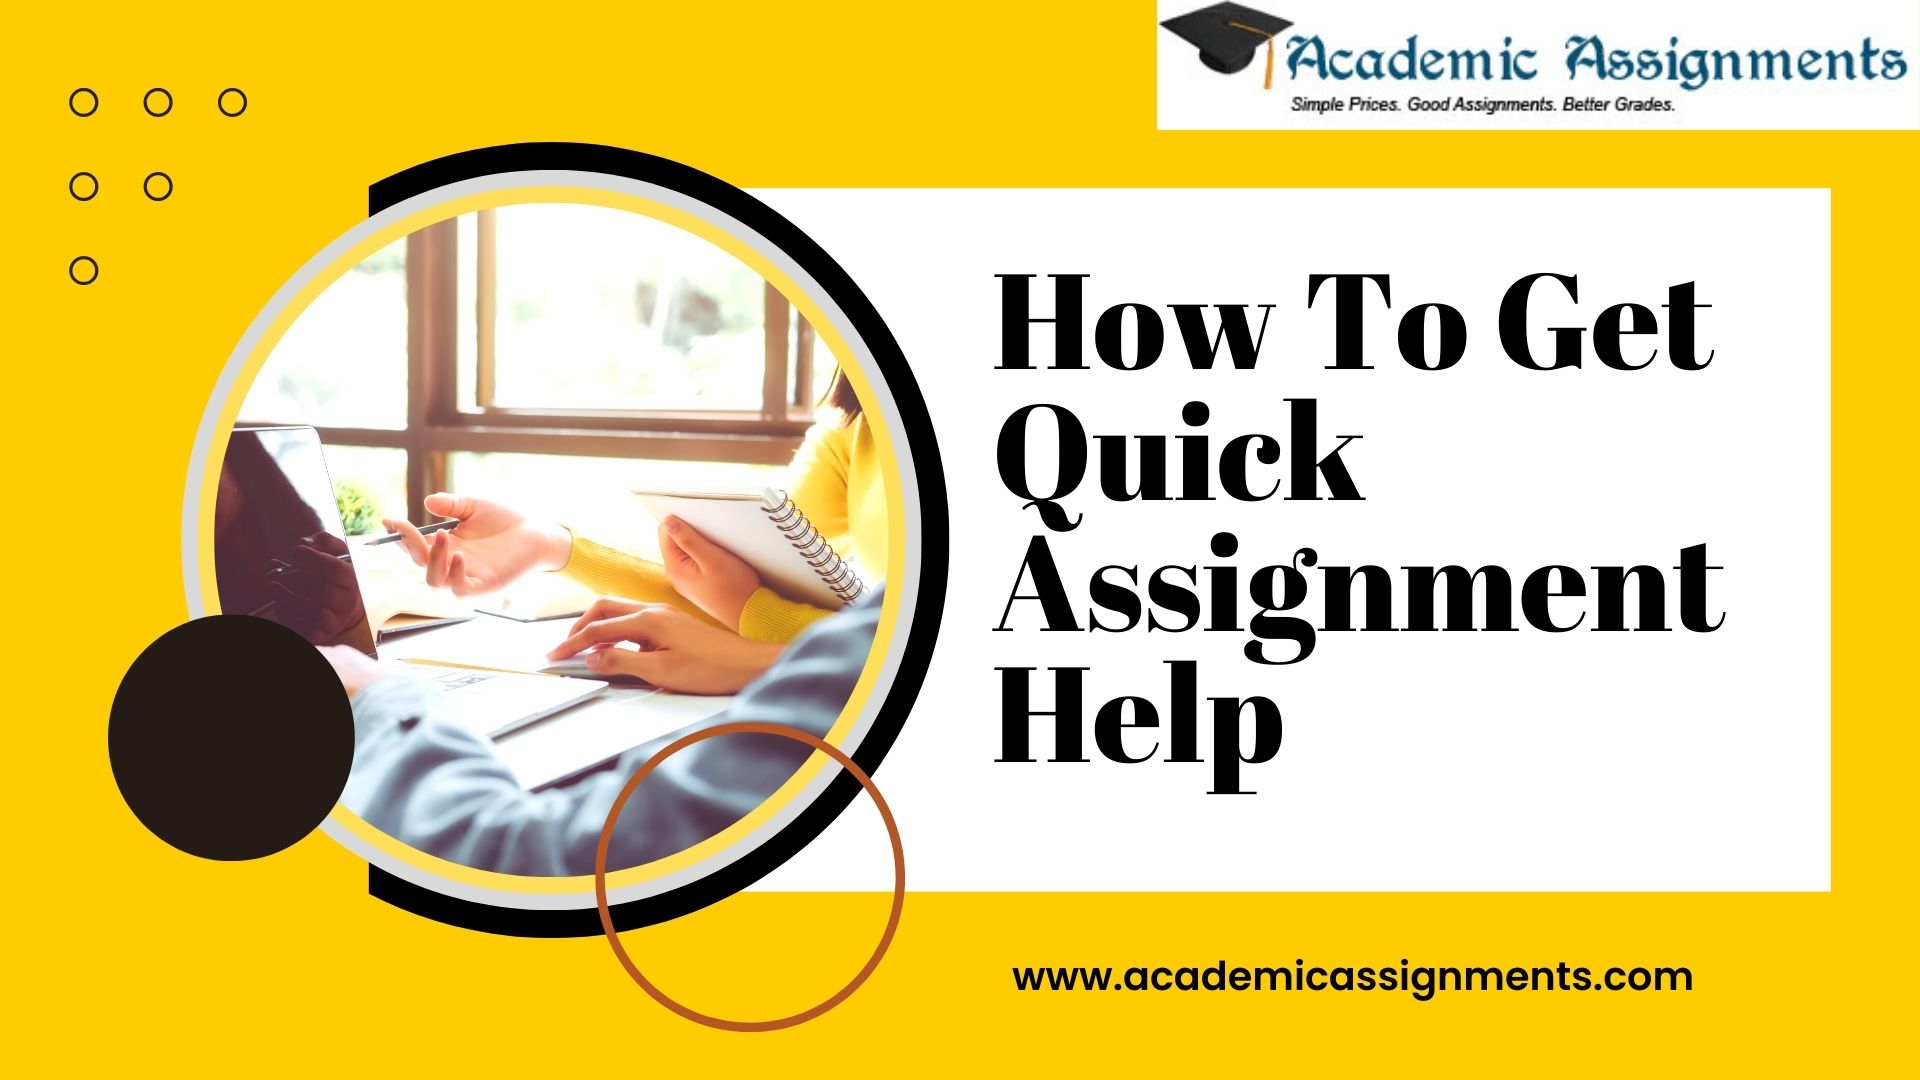 How To Get Quick Assignment Help